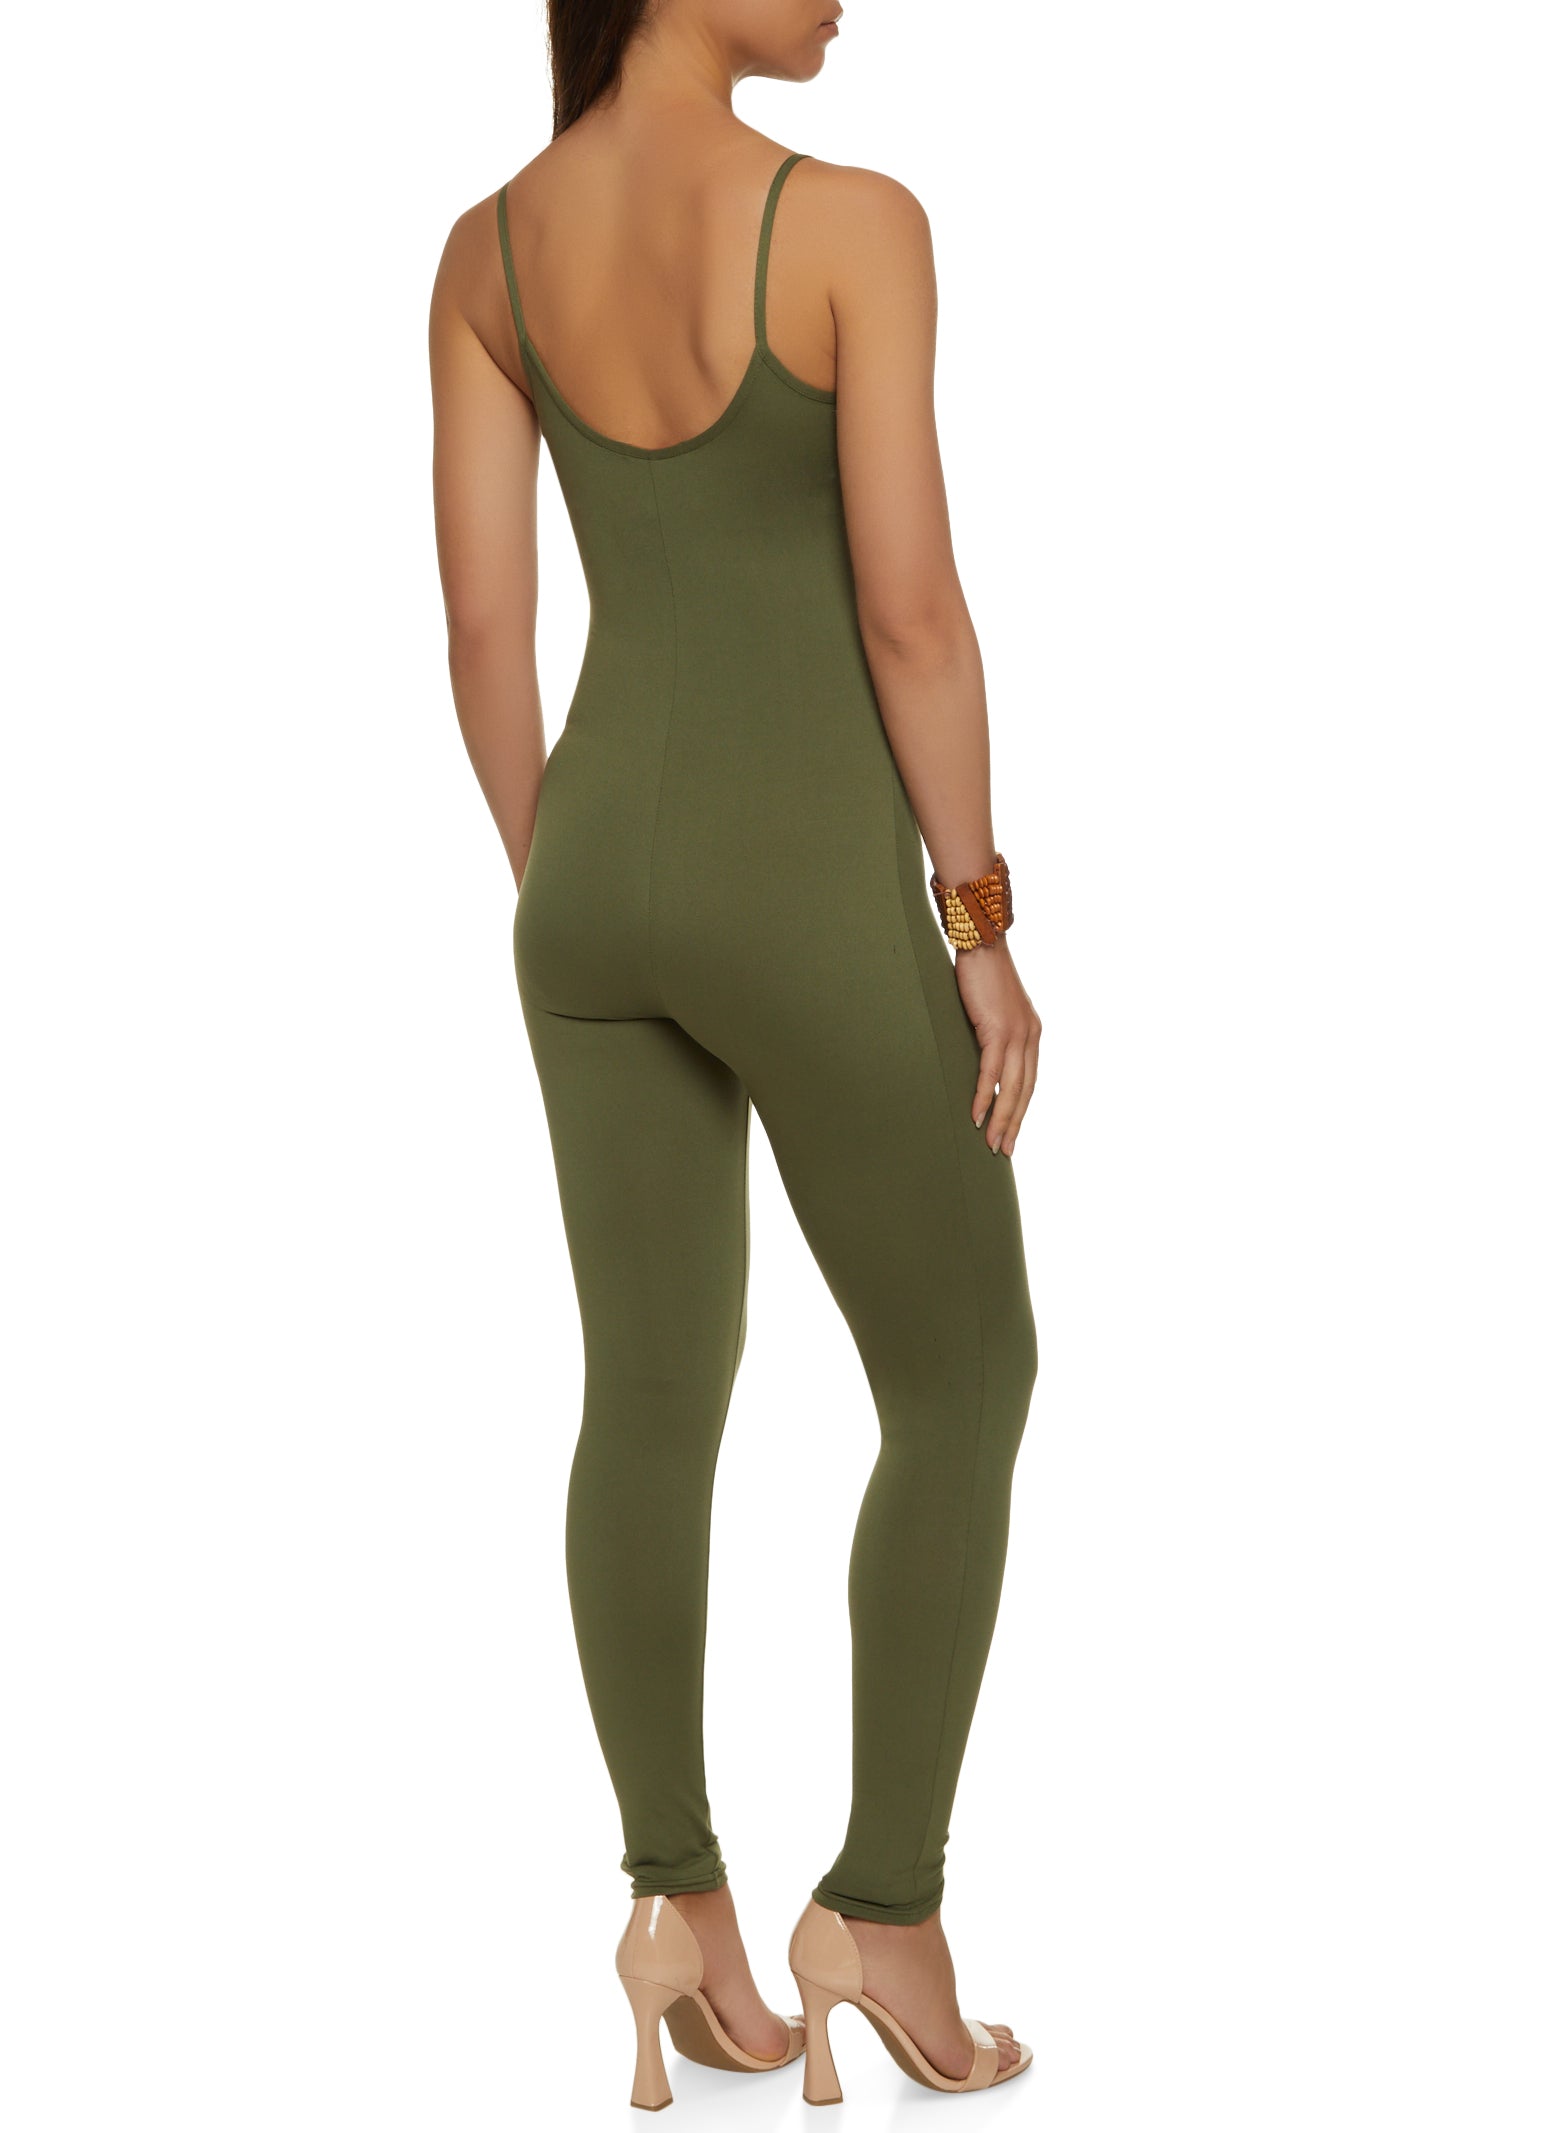 Soft Knit Cami Catsuit